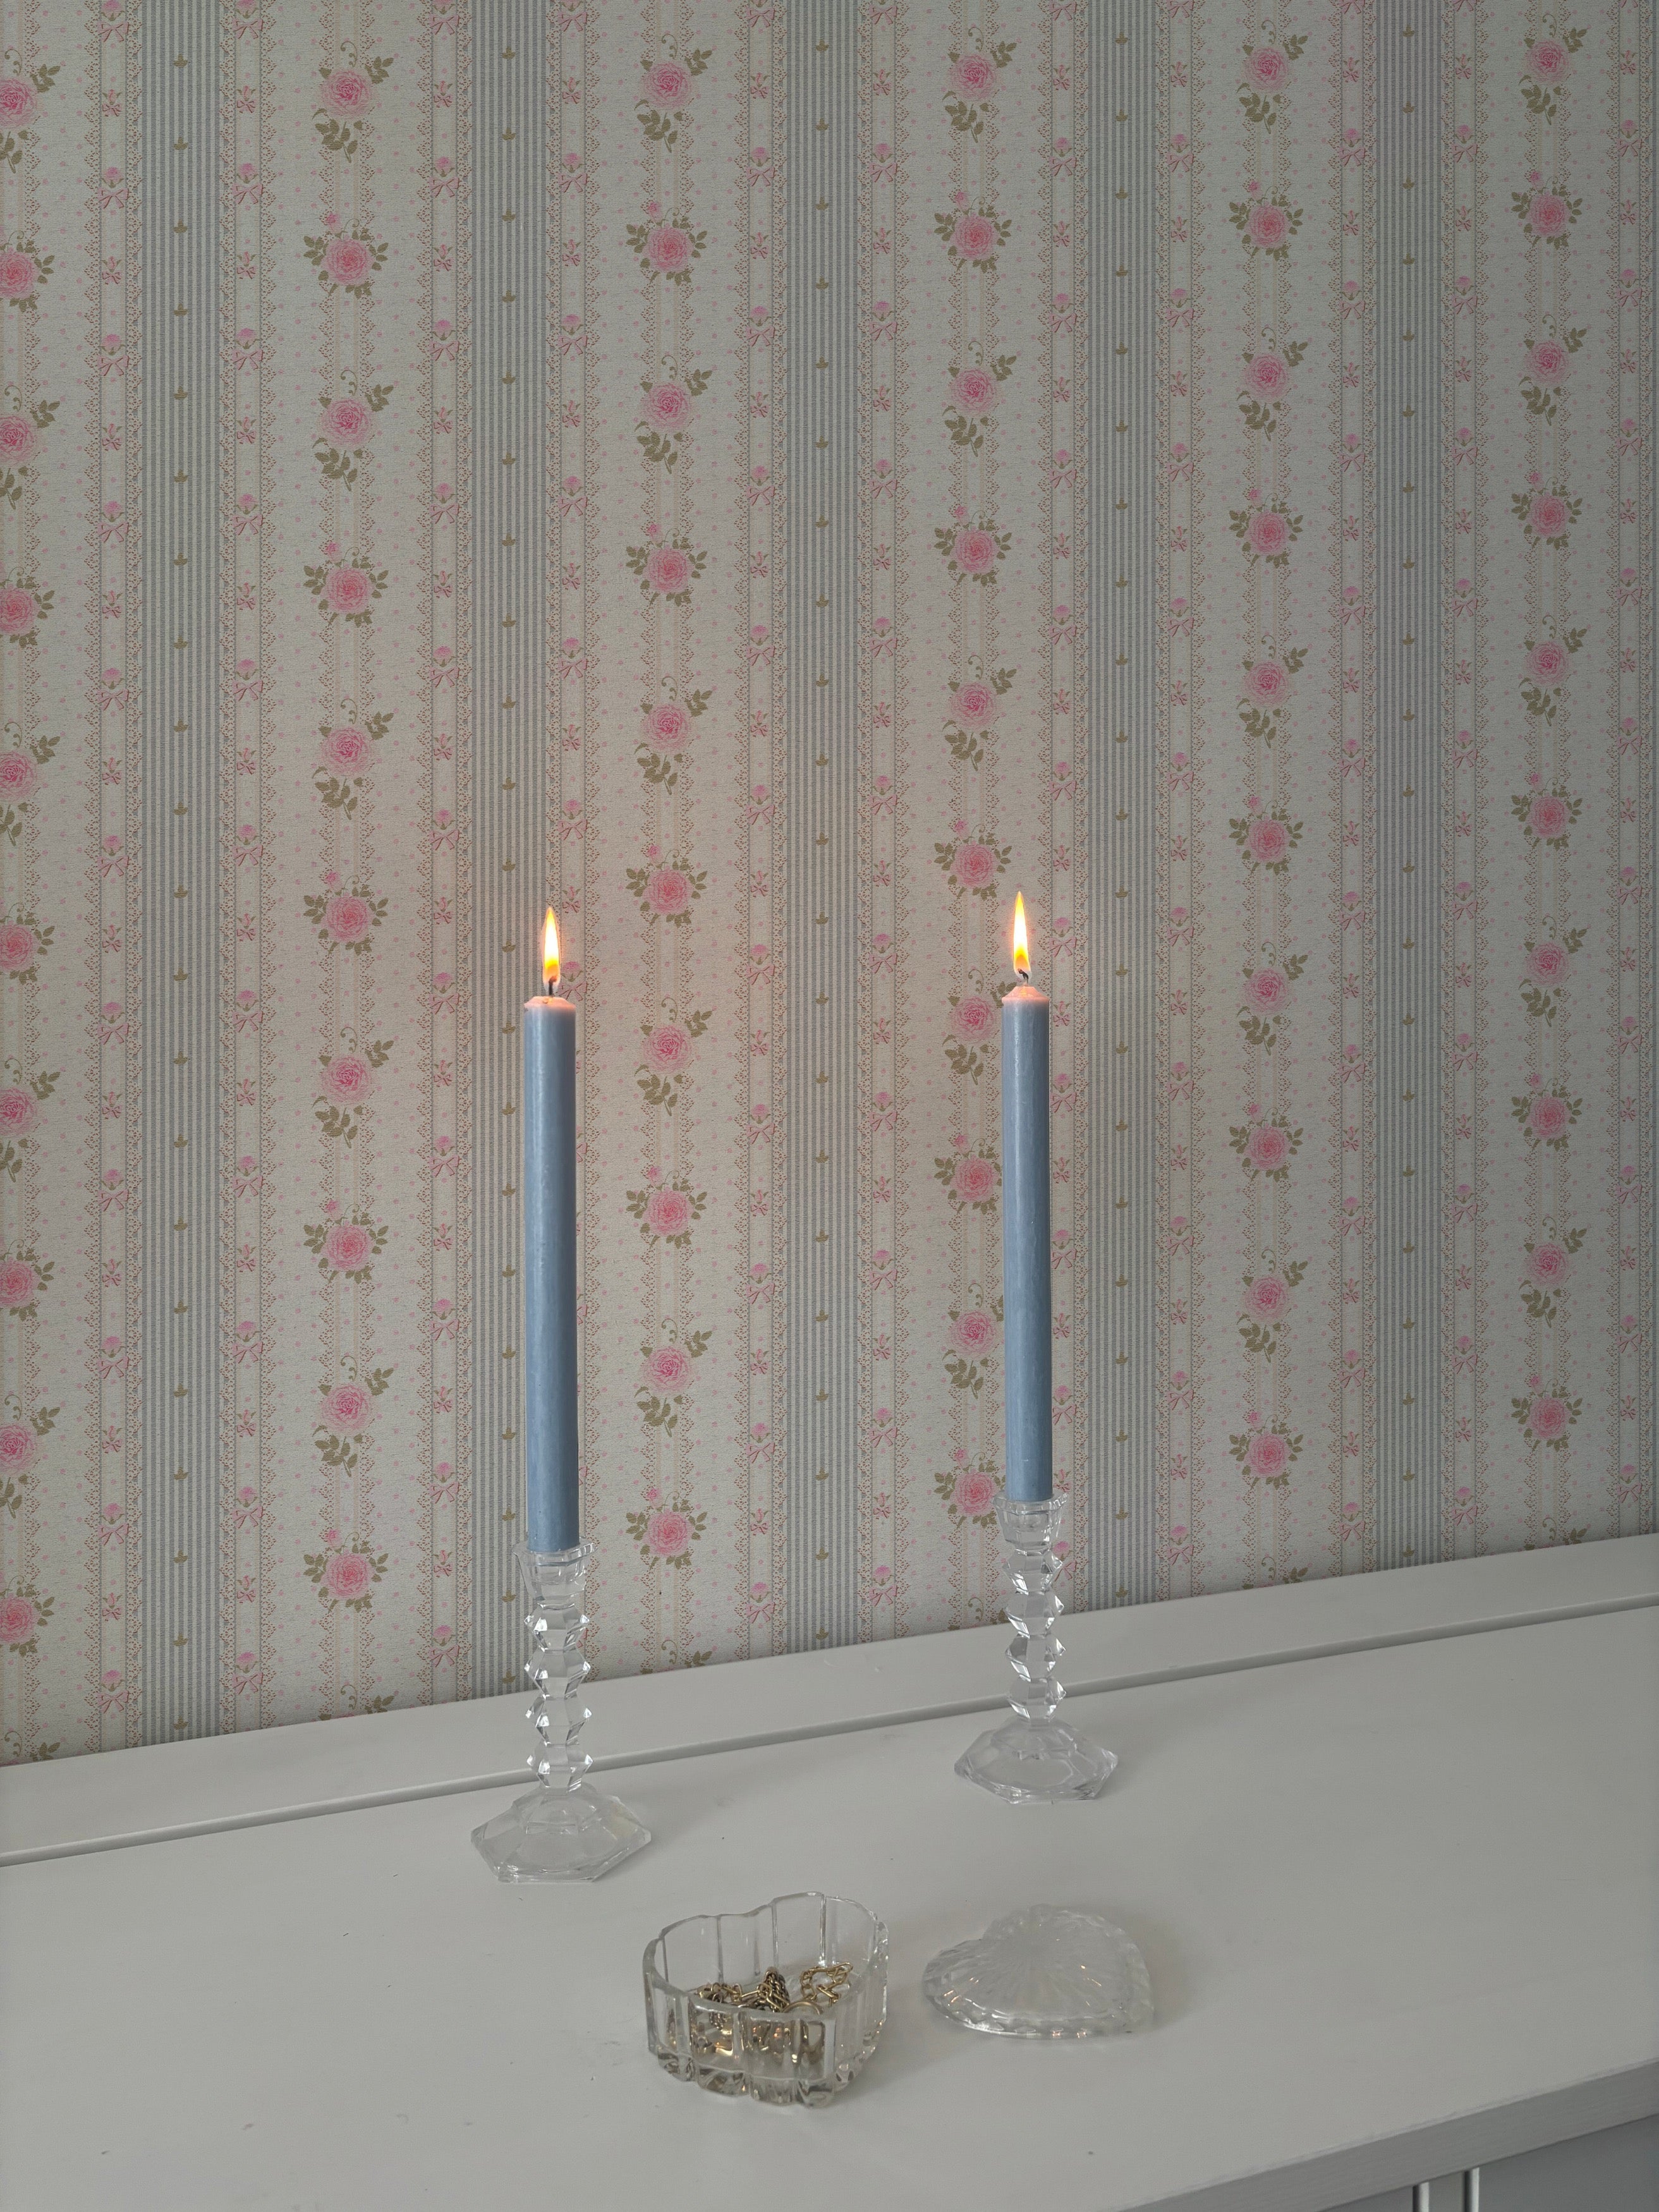 Elegant dining or workspace showcasing Vintage Cutie Wallpaper with pink rose stripes, accented by lit candles in tall crystal holders and a clear glass ashtray, reflecting a refined, classic decor style